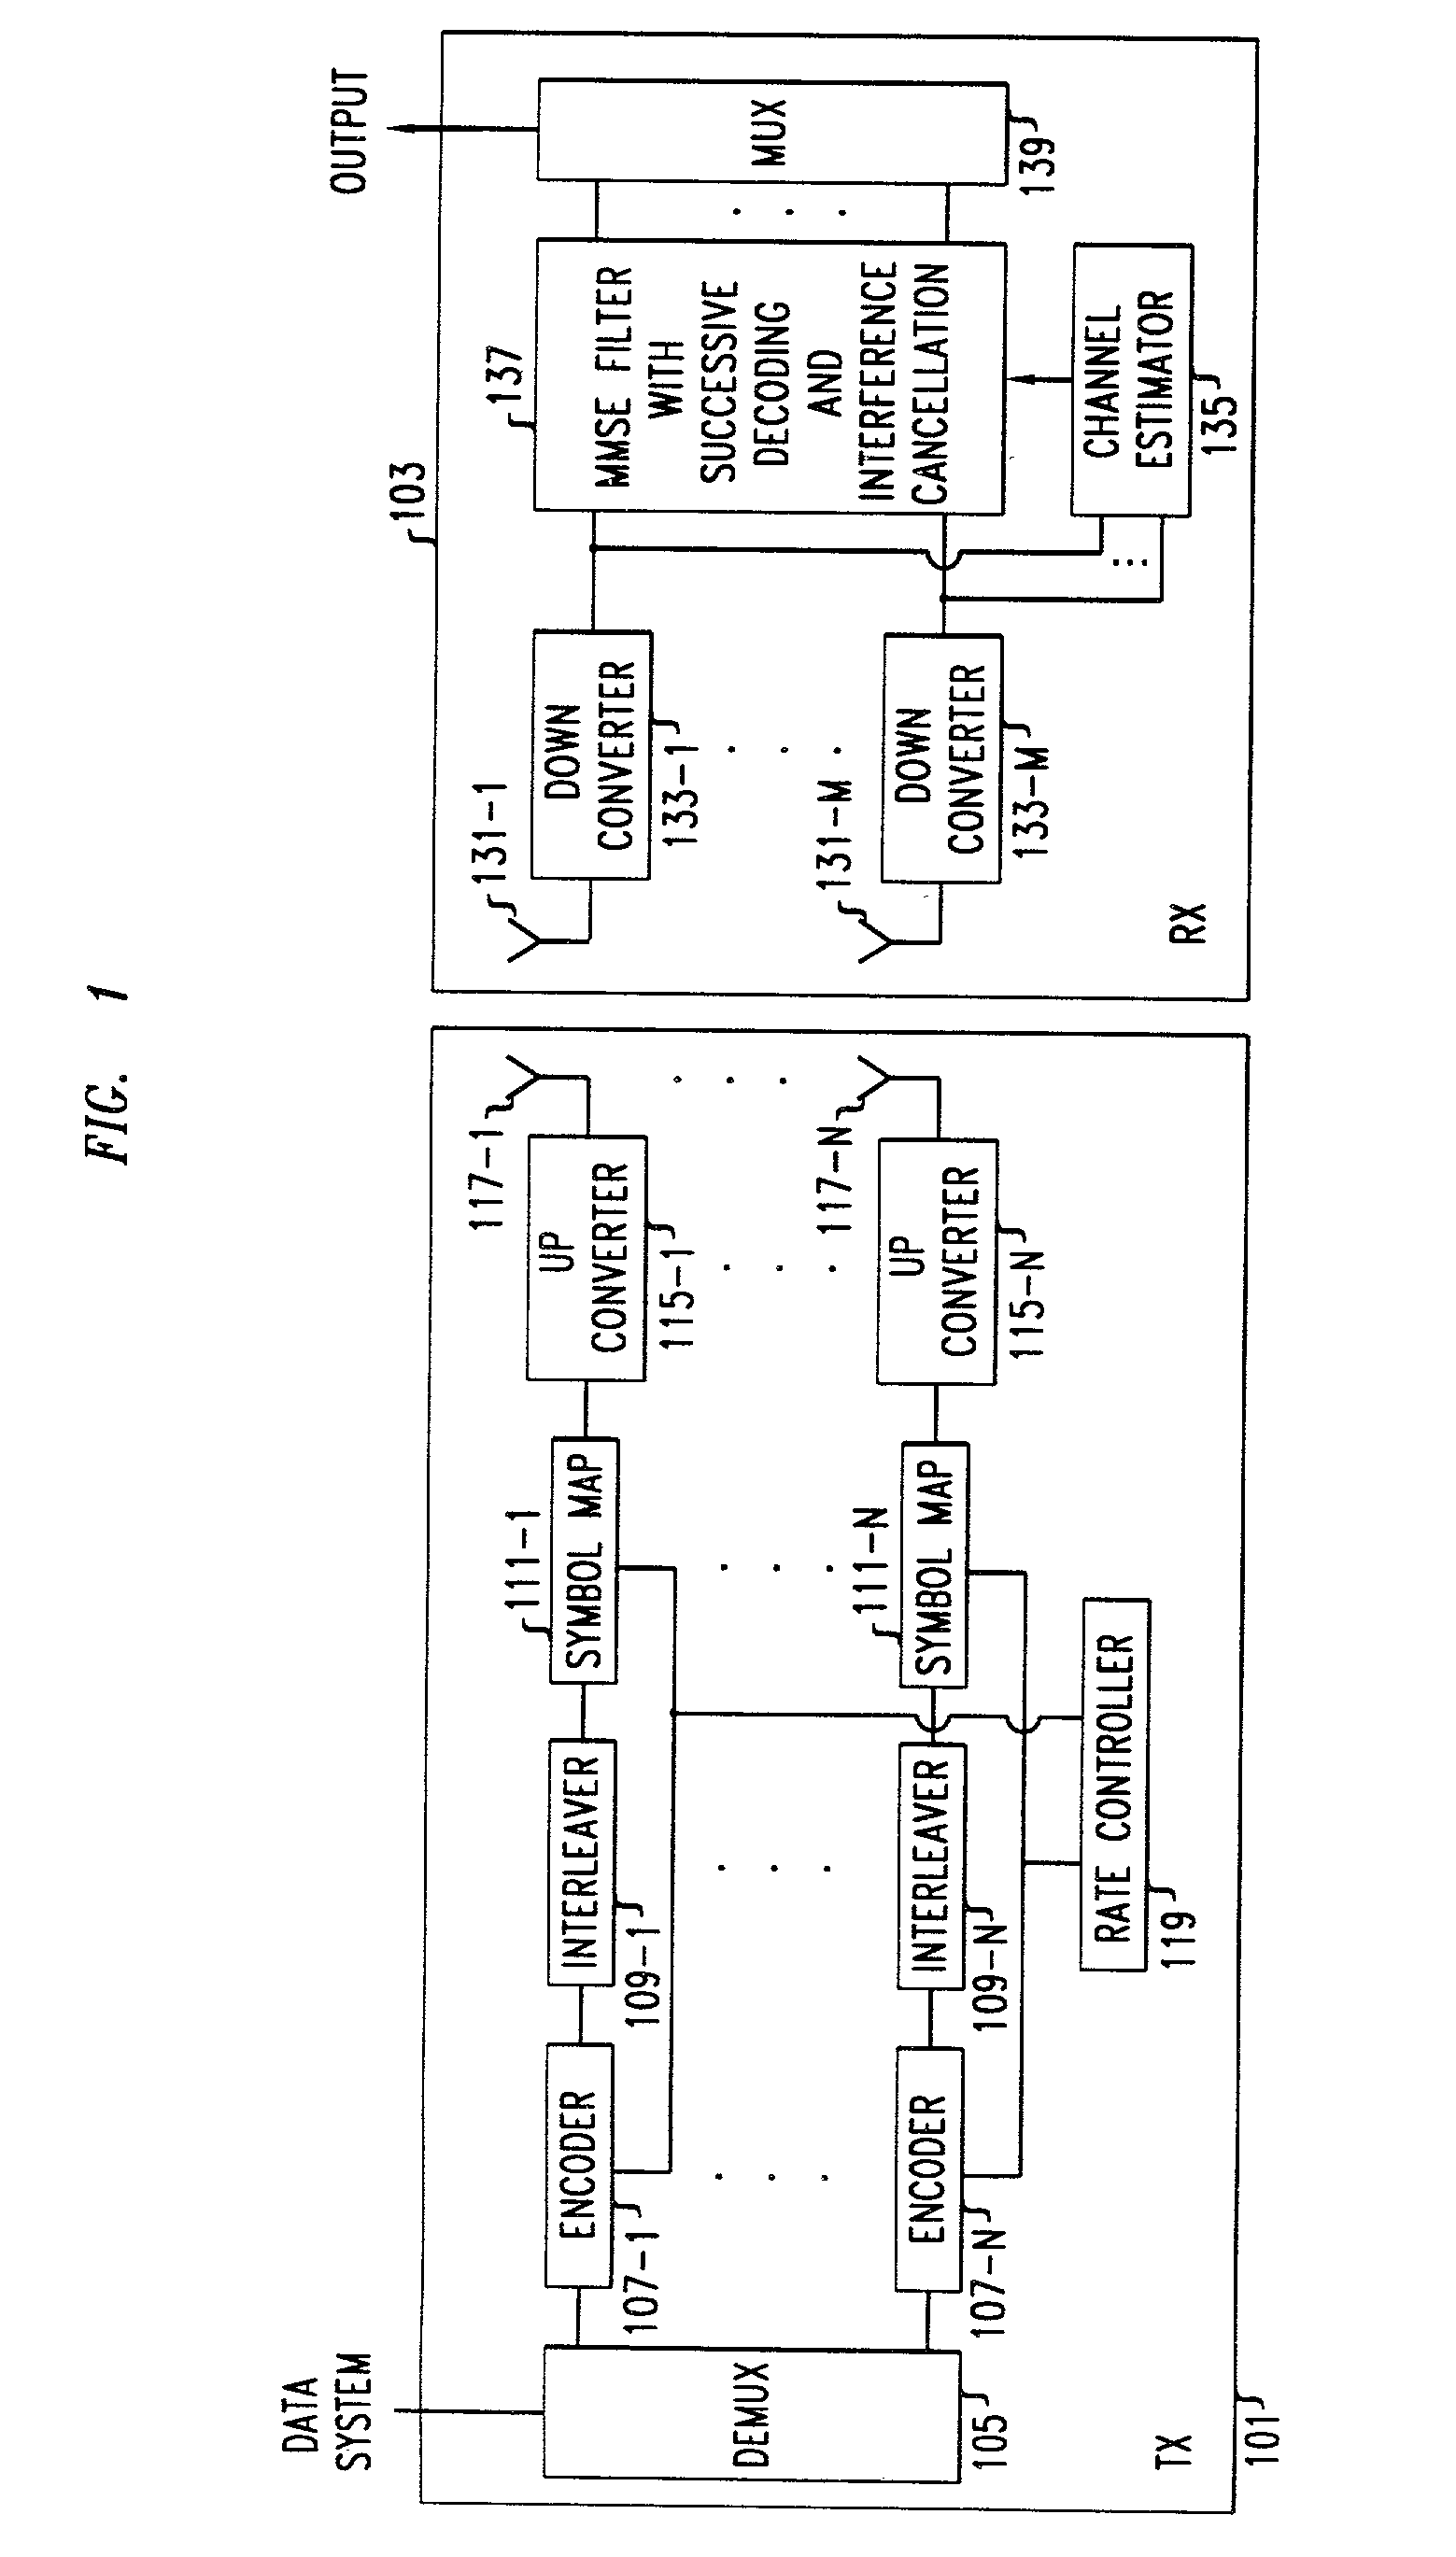 Rate control technique for layered architectures with multiple transmit and receive antennas